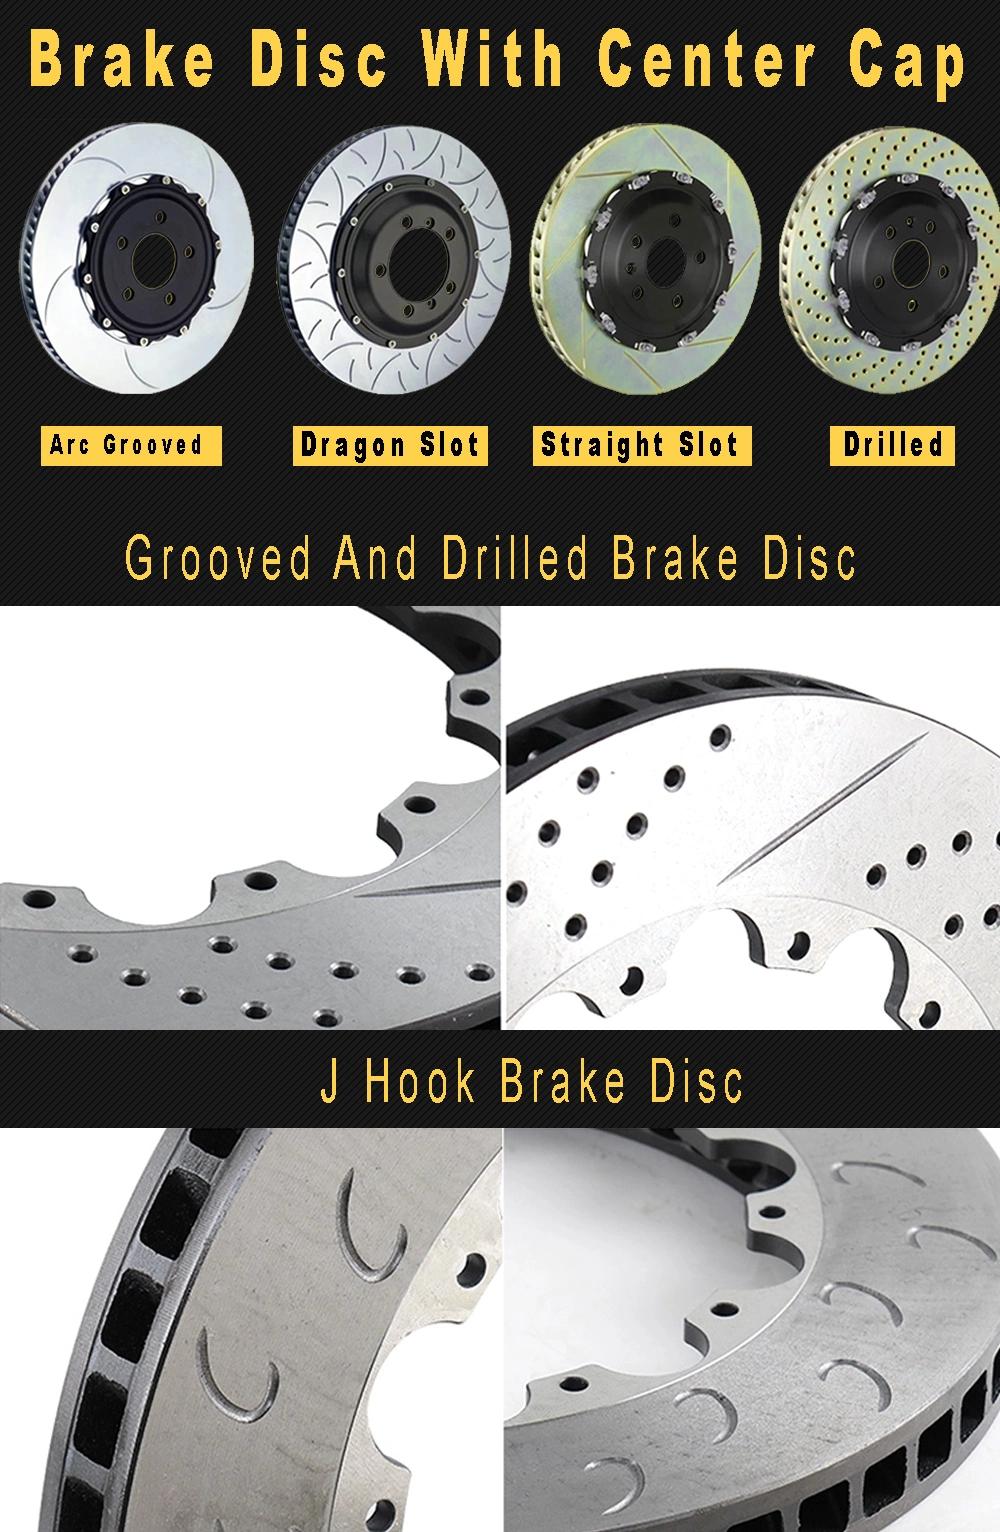 Wholesale Car Accessories Sollted and Drilled Brake Disc/Plate Rotor 517123m700/51712b1100 for Hyundai